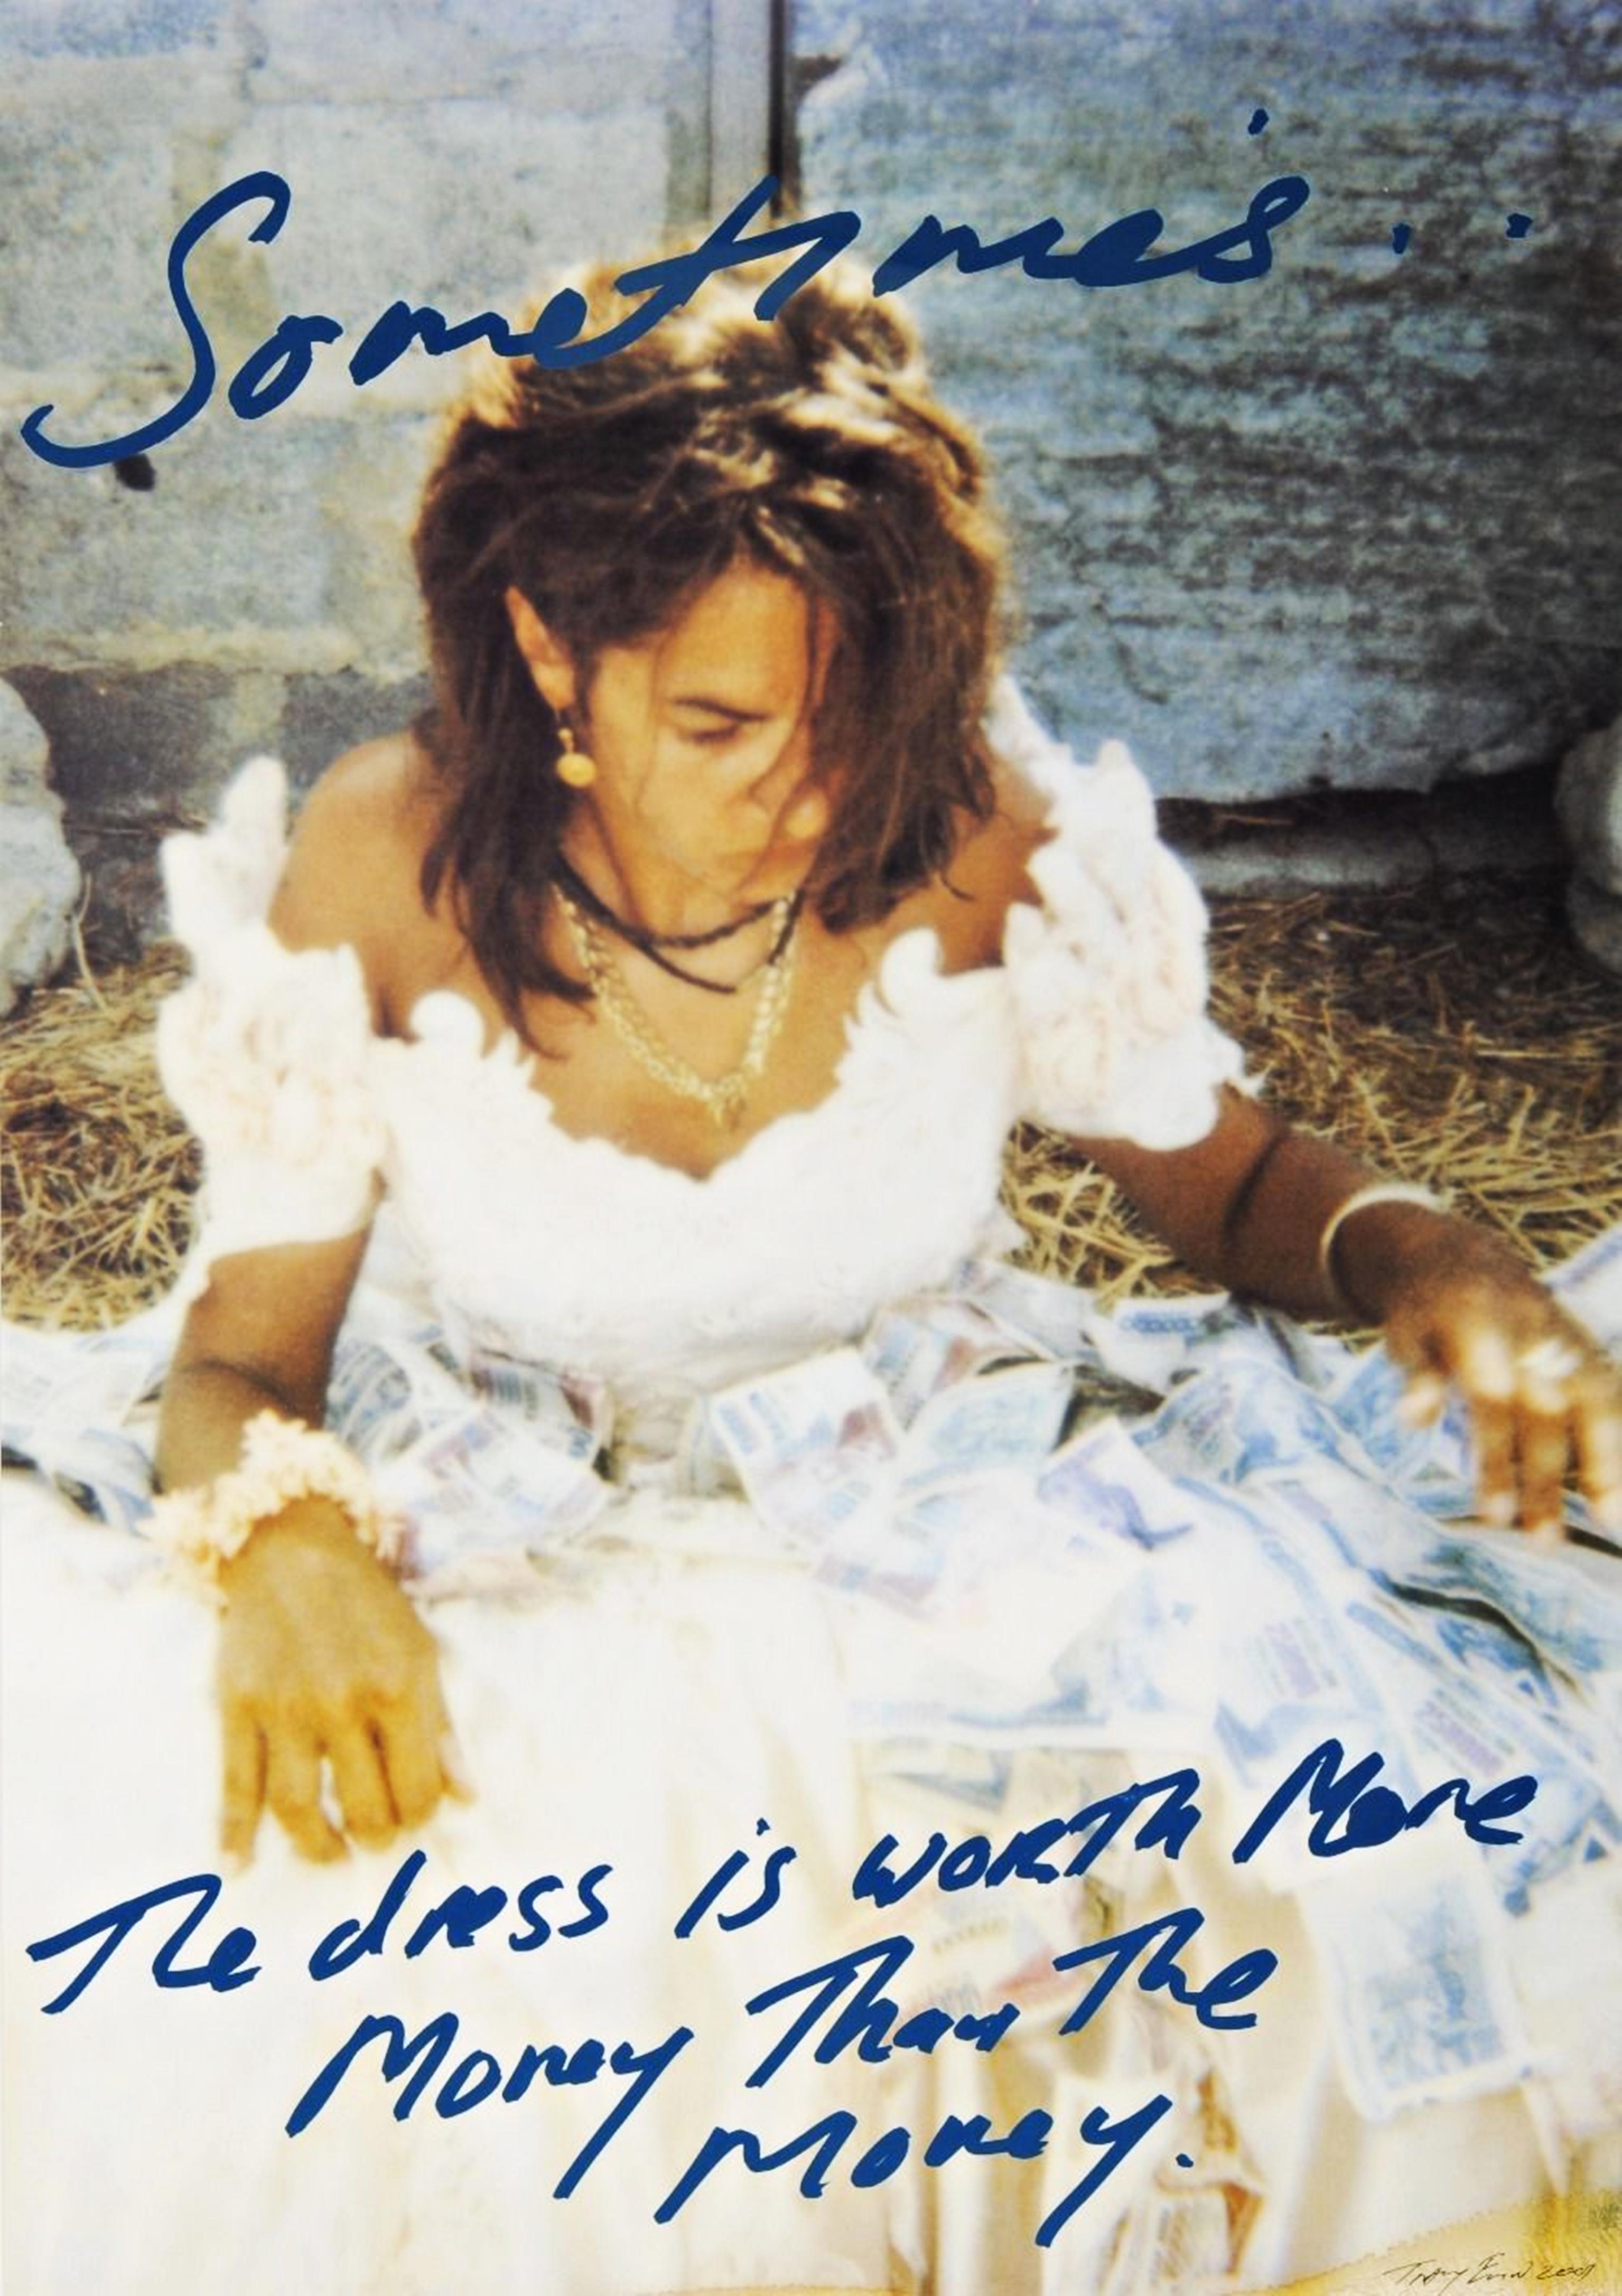 Tracey Emin Portrait Print - Sometimes the Dress is Worth More Money than the Money (1 of 50 Hand Signed)